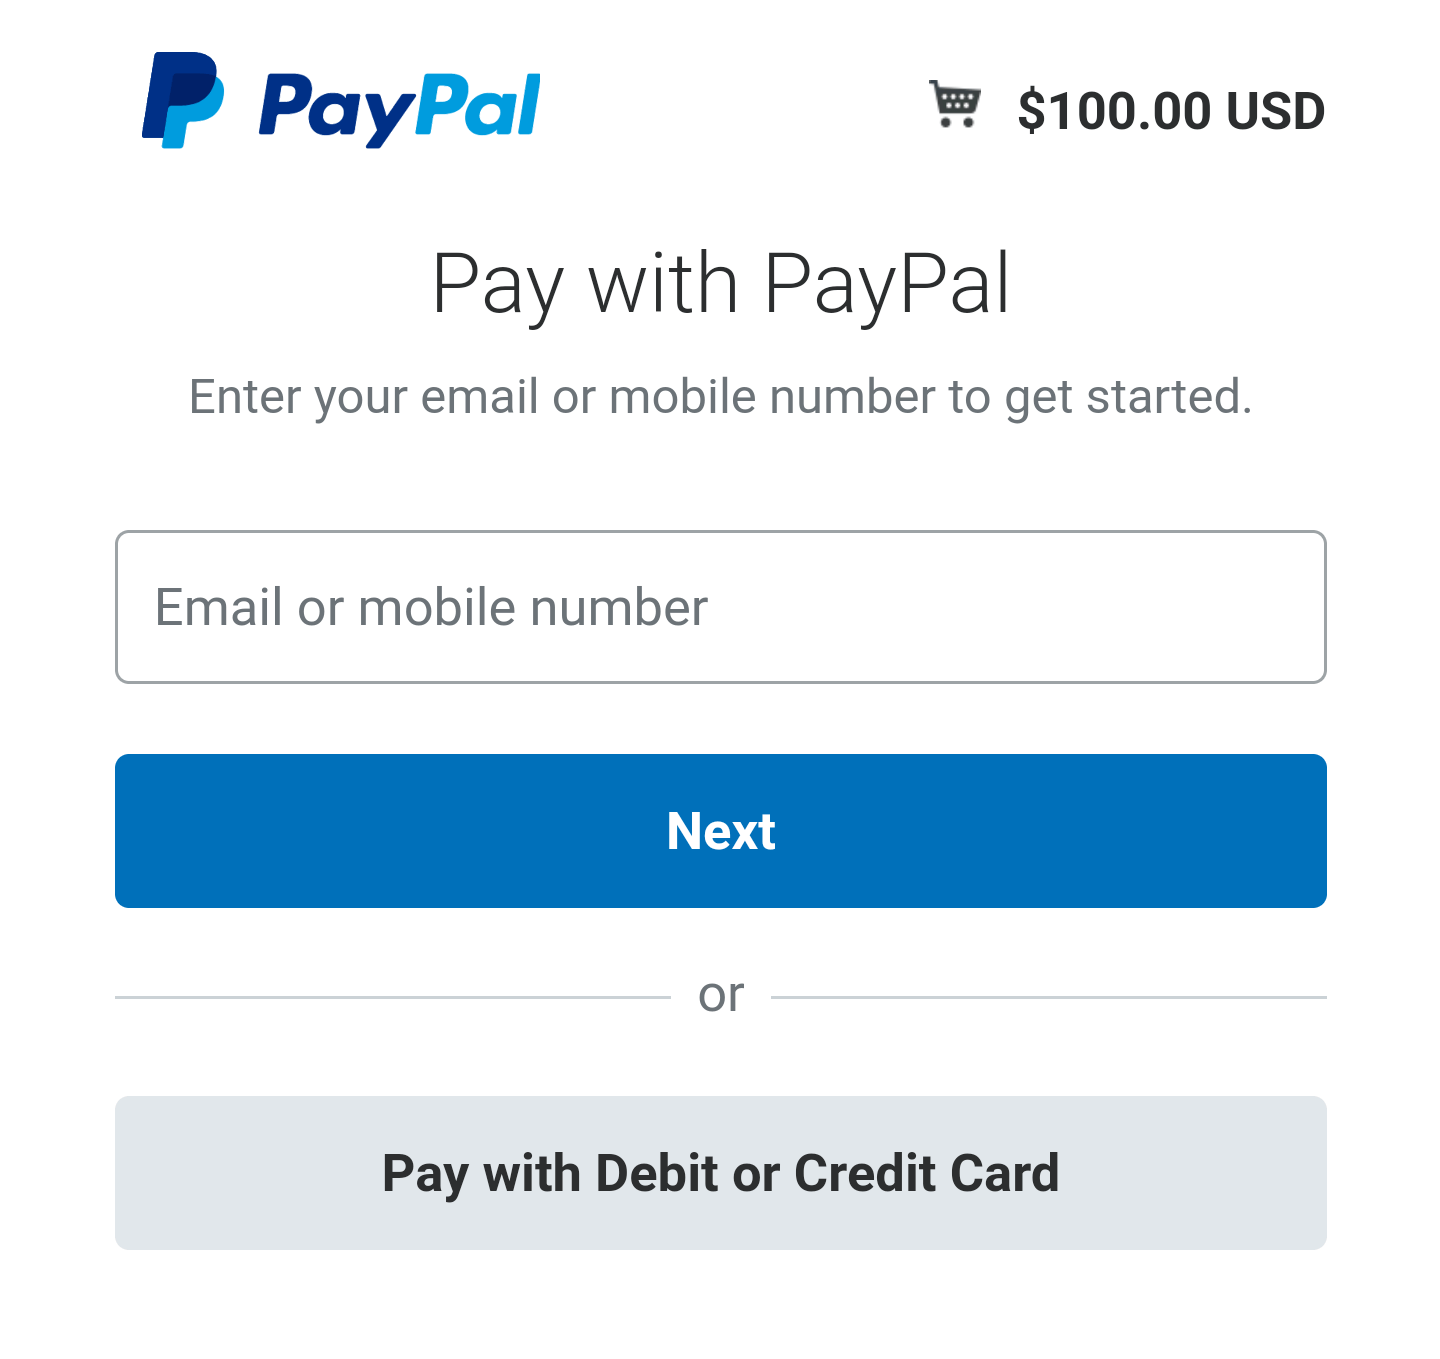 Pay with Your PayPal Account